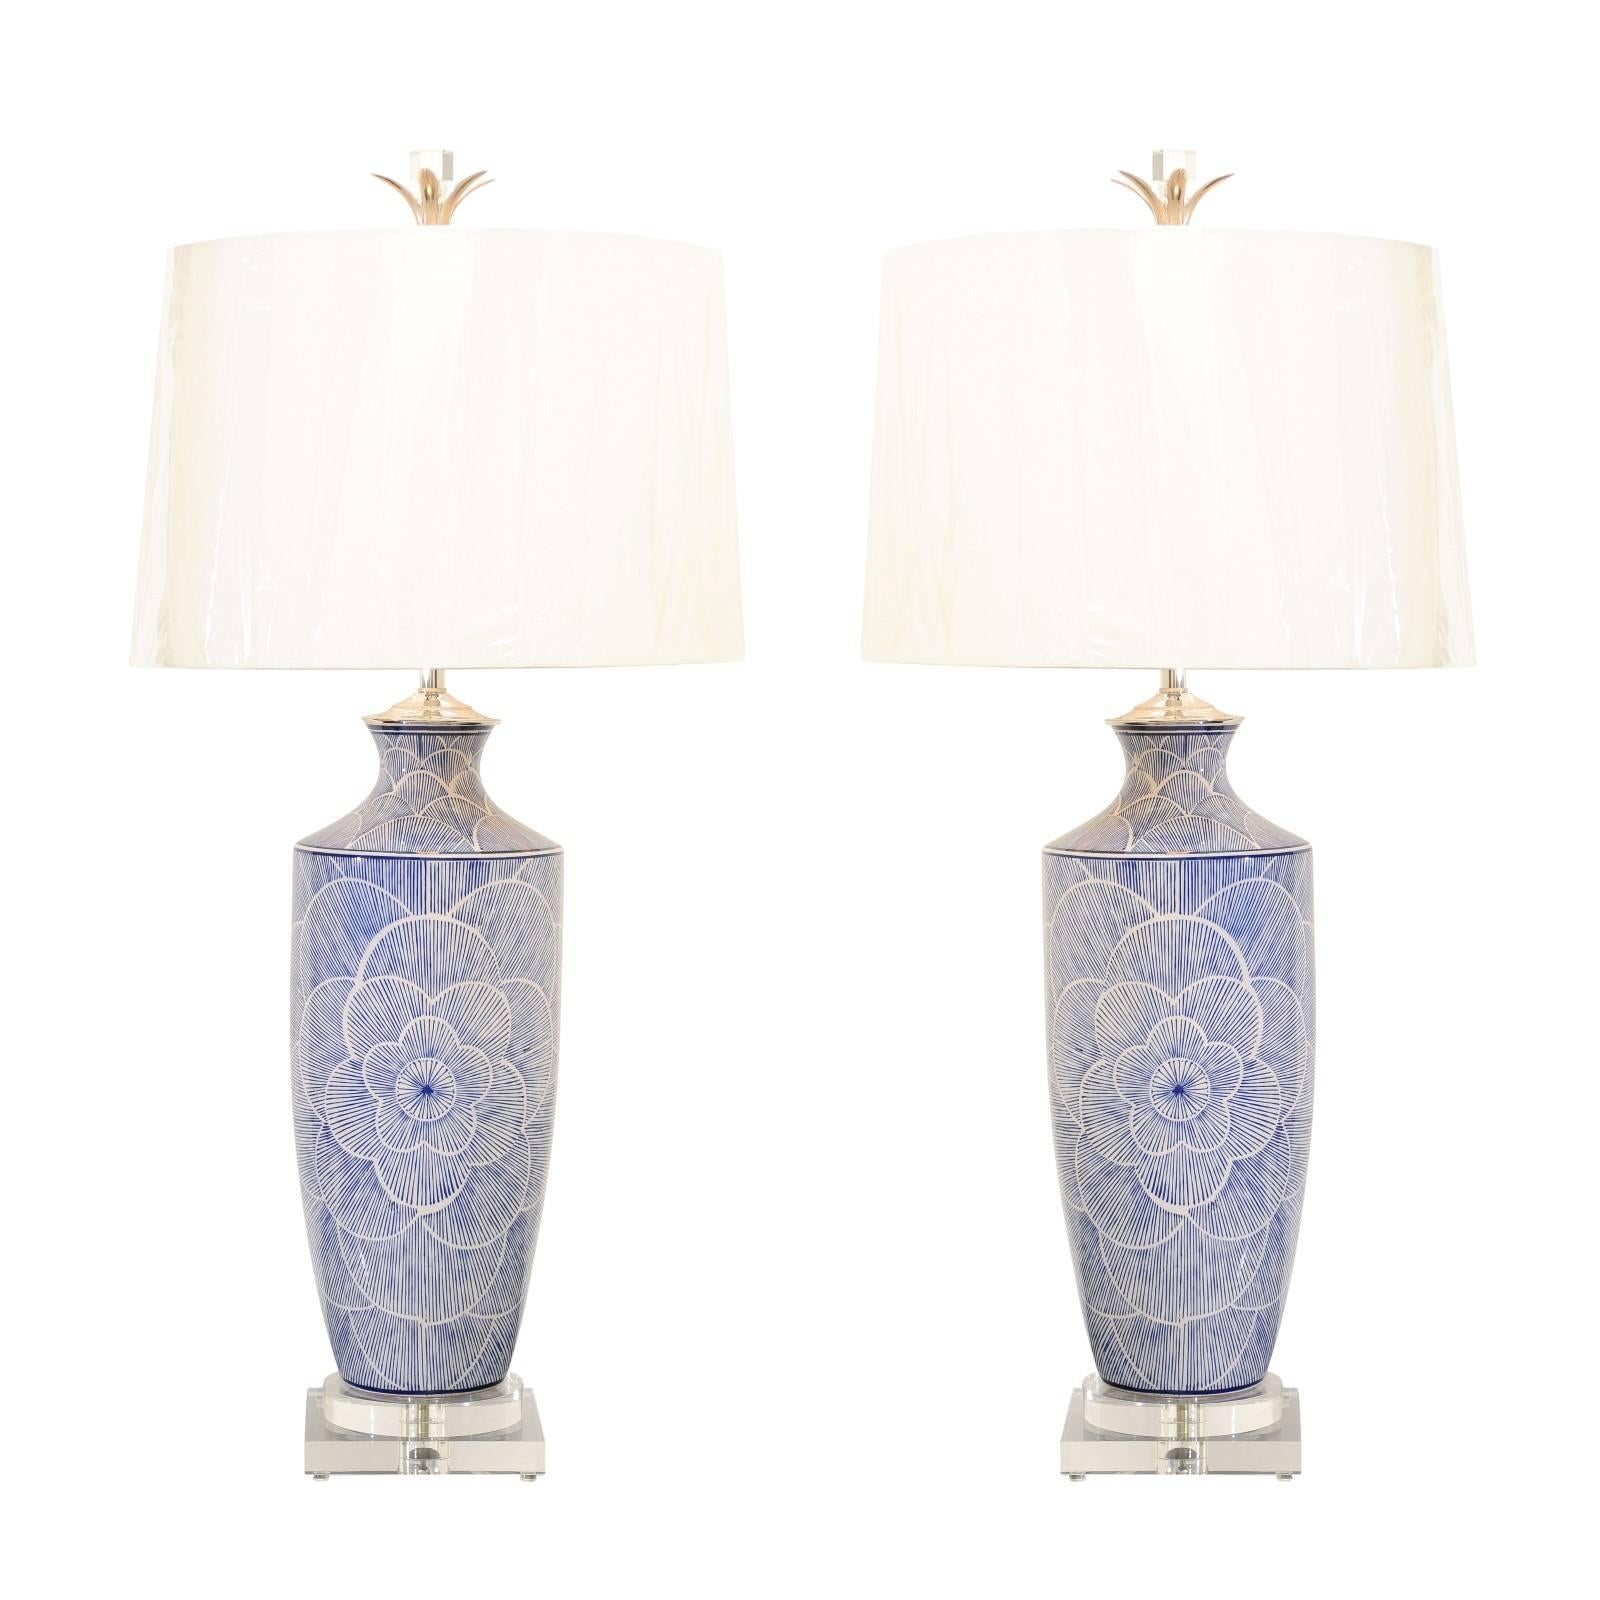 Dramatic Graphic Pair of Large-Scale Ceramic Lamps in Navy and White For Sale